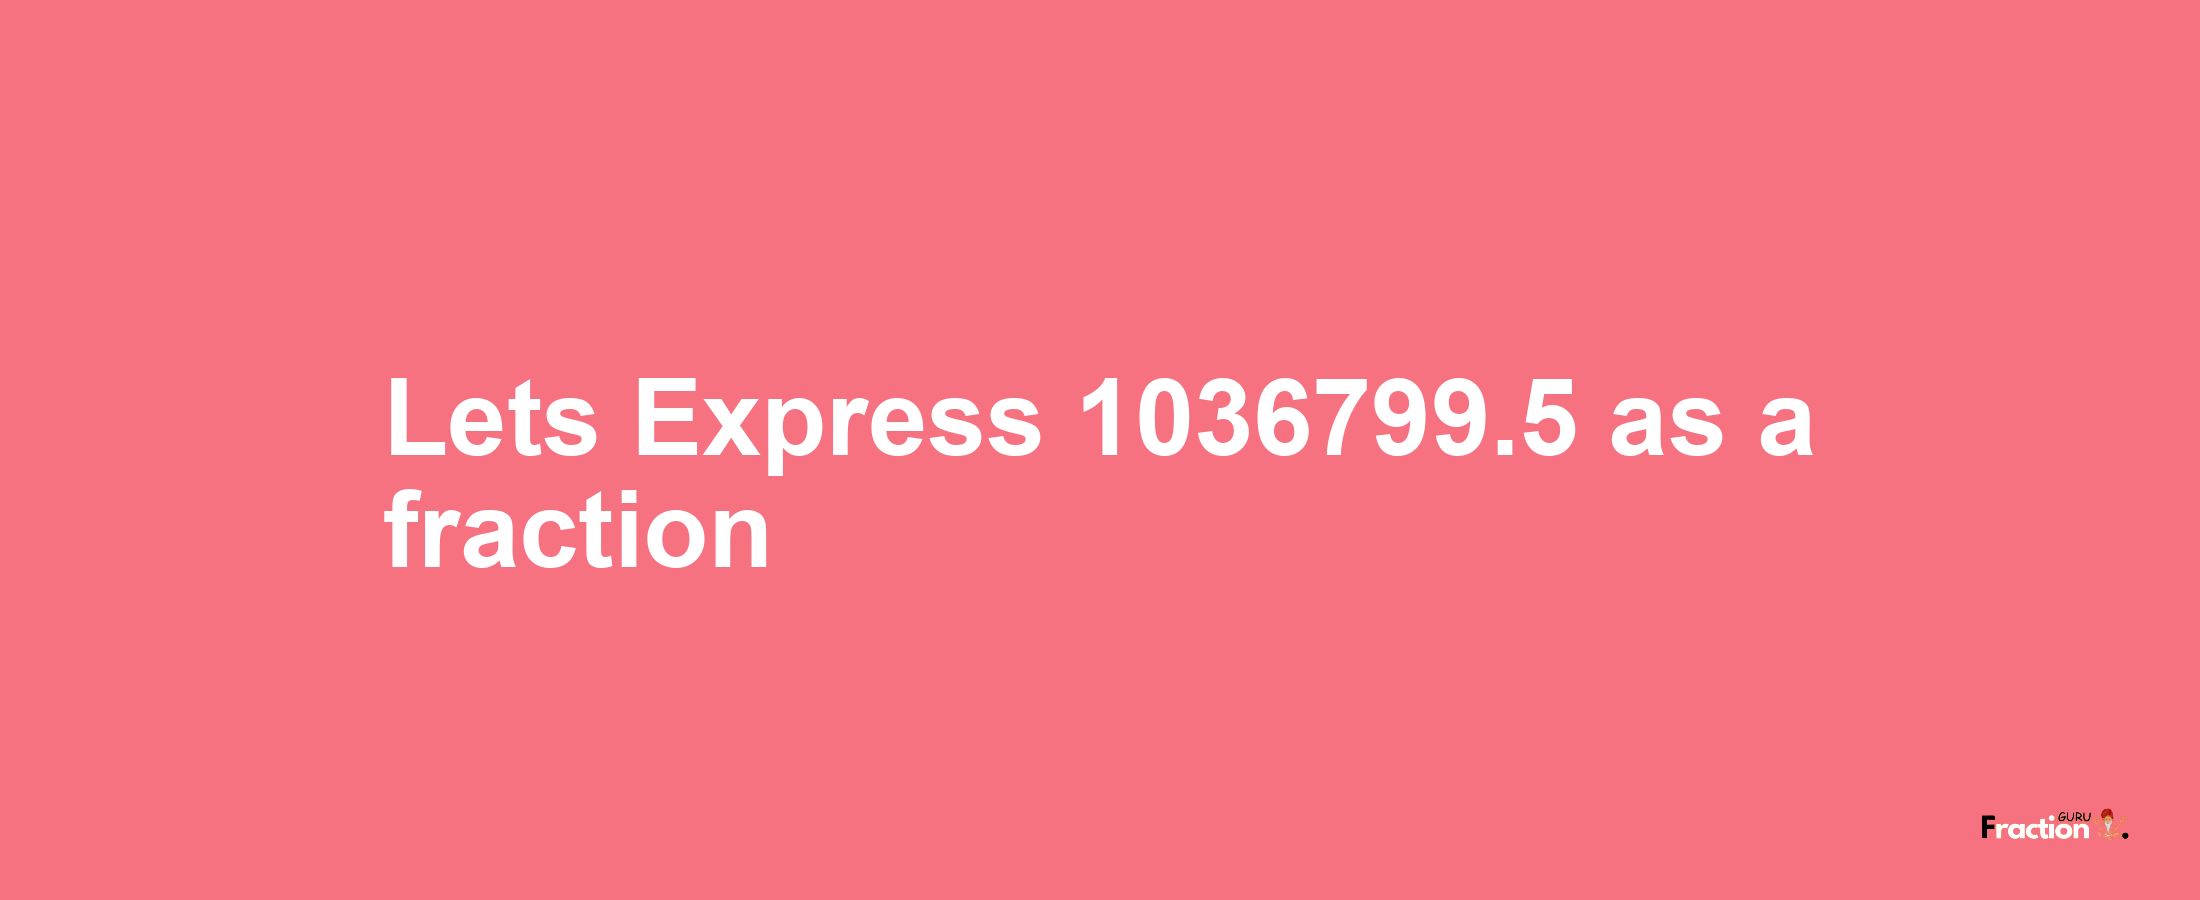 Lets Express 1036799.5 as afraction